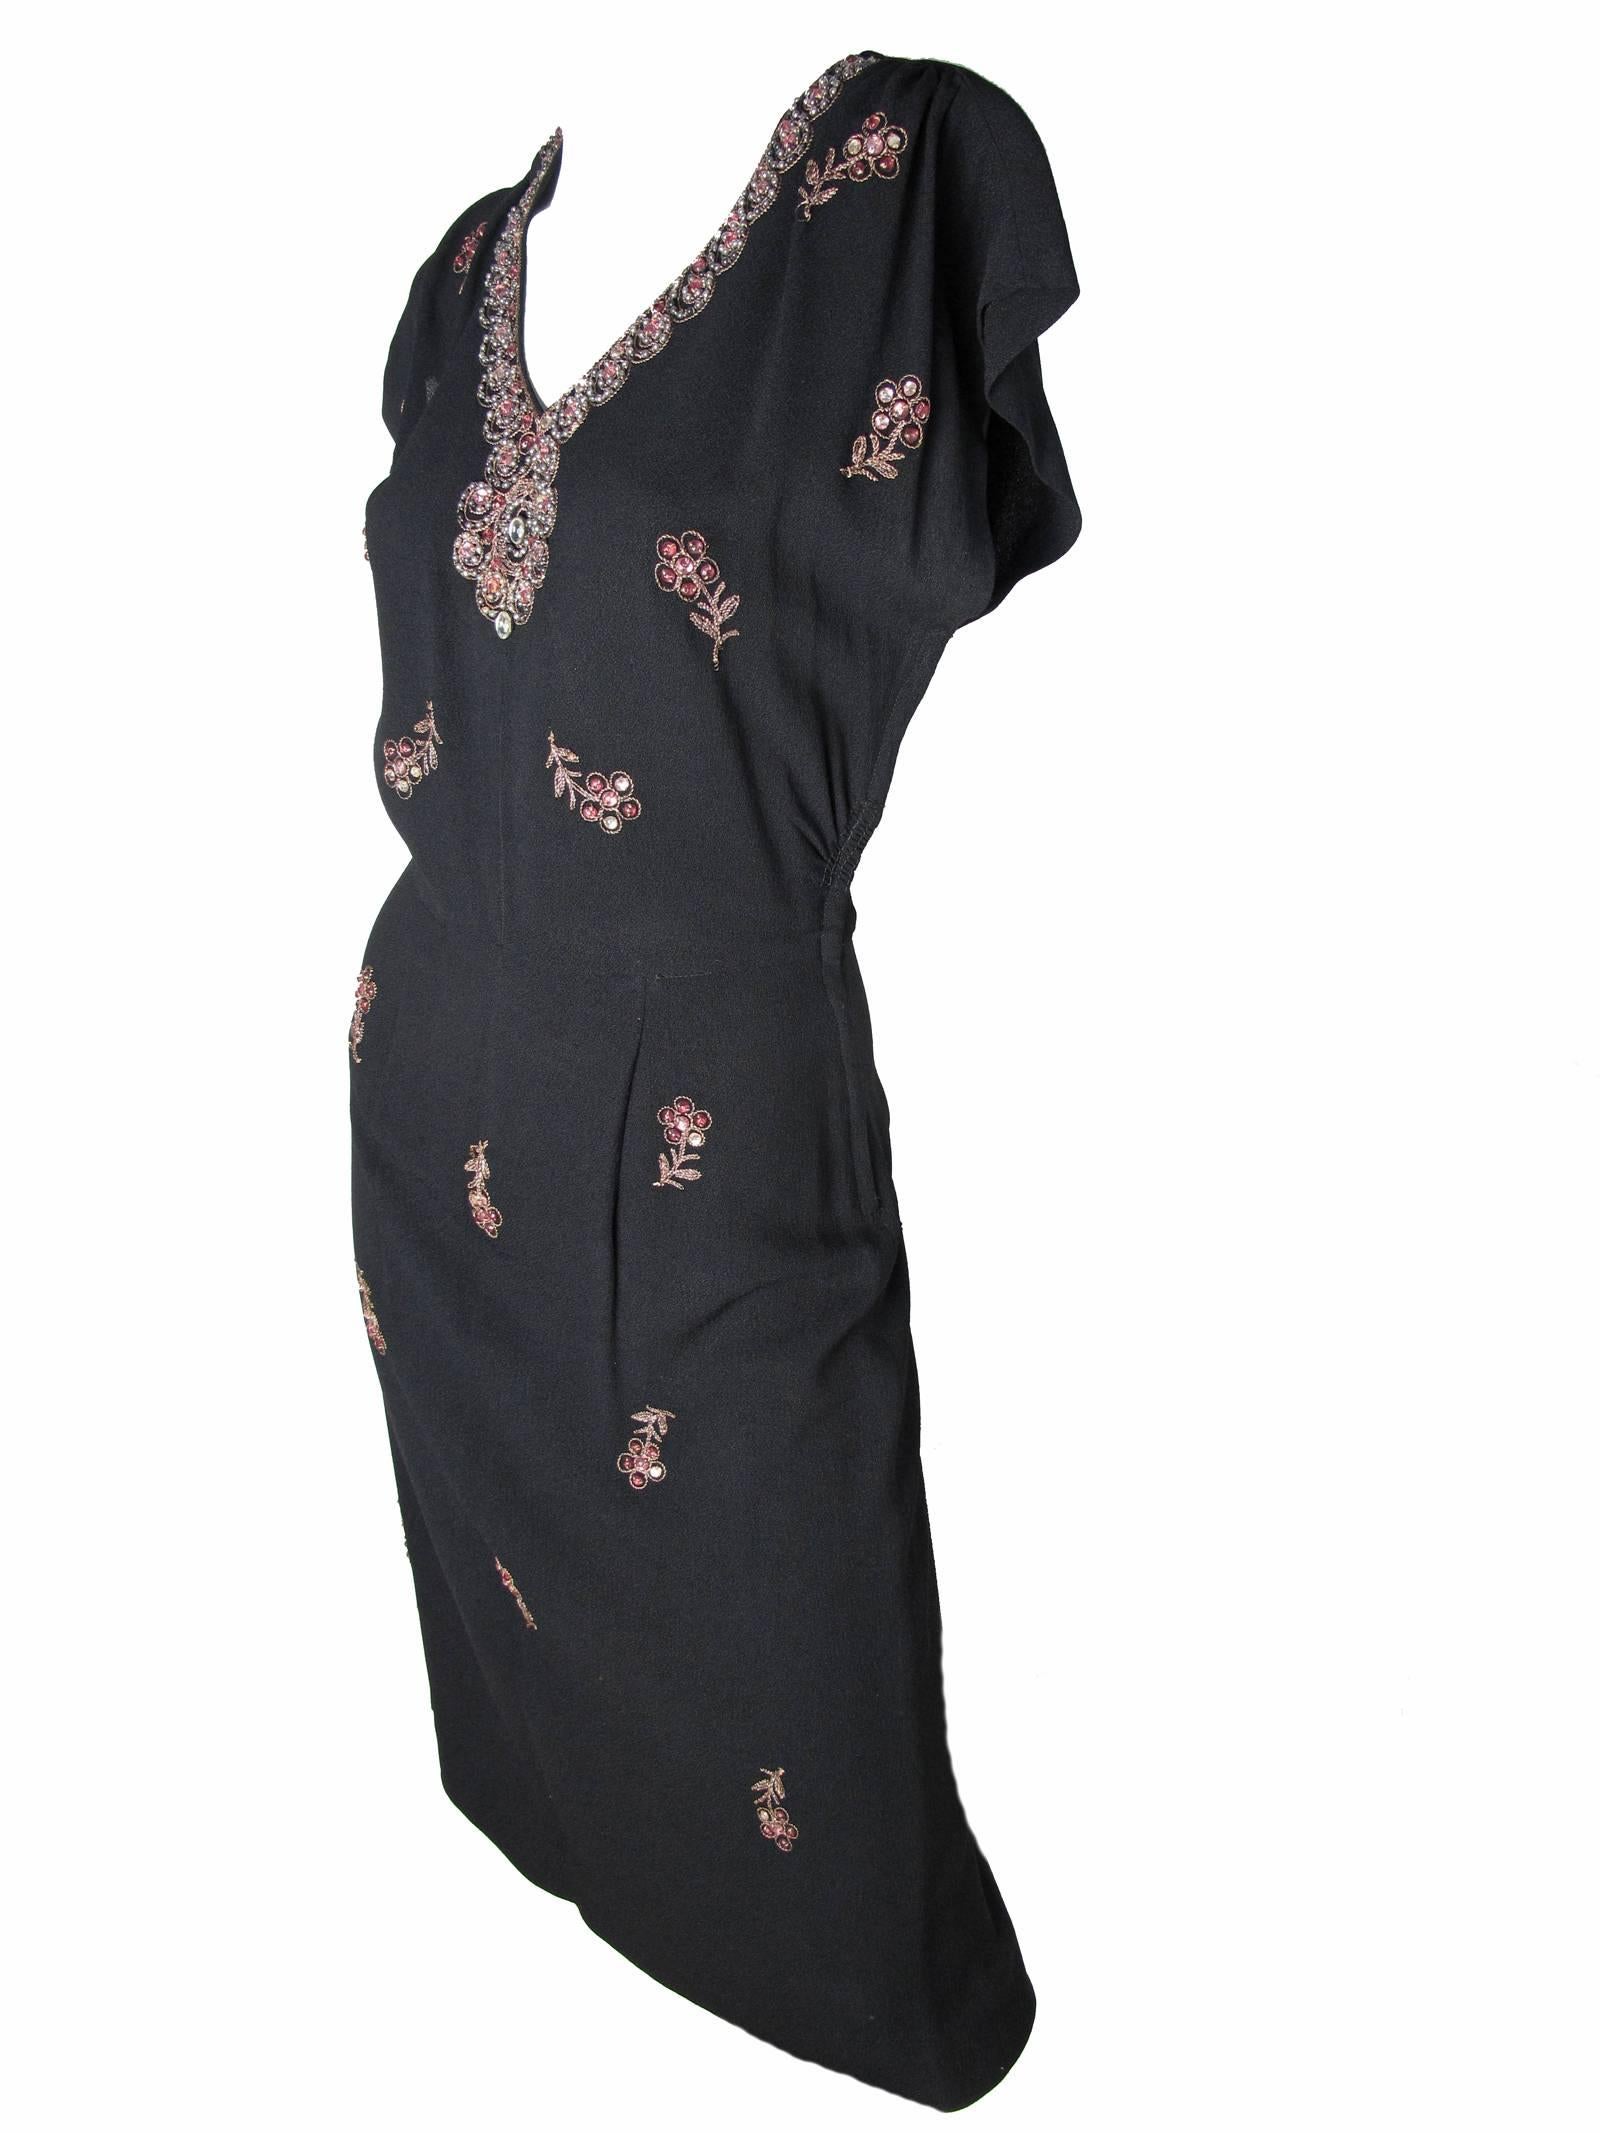 1940s black crepe dress with floral beading. Condition: Very good. 
Size 6.  Approximate measurements: 36